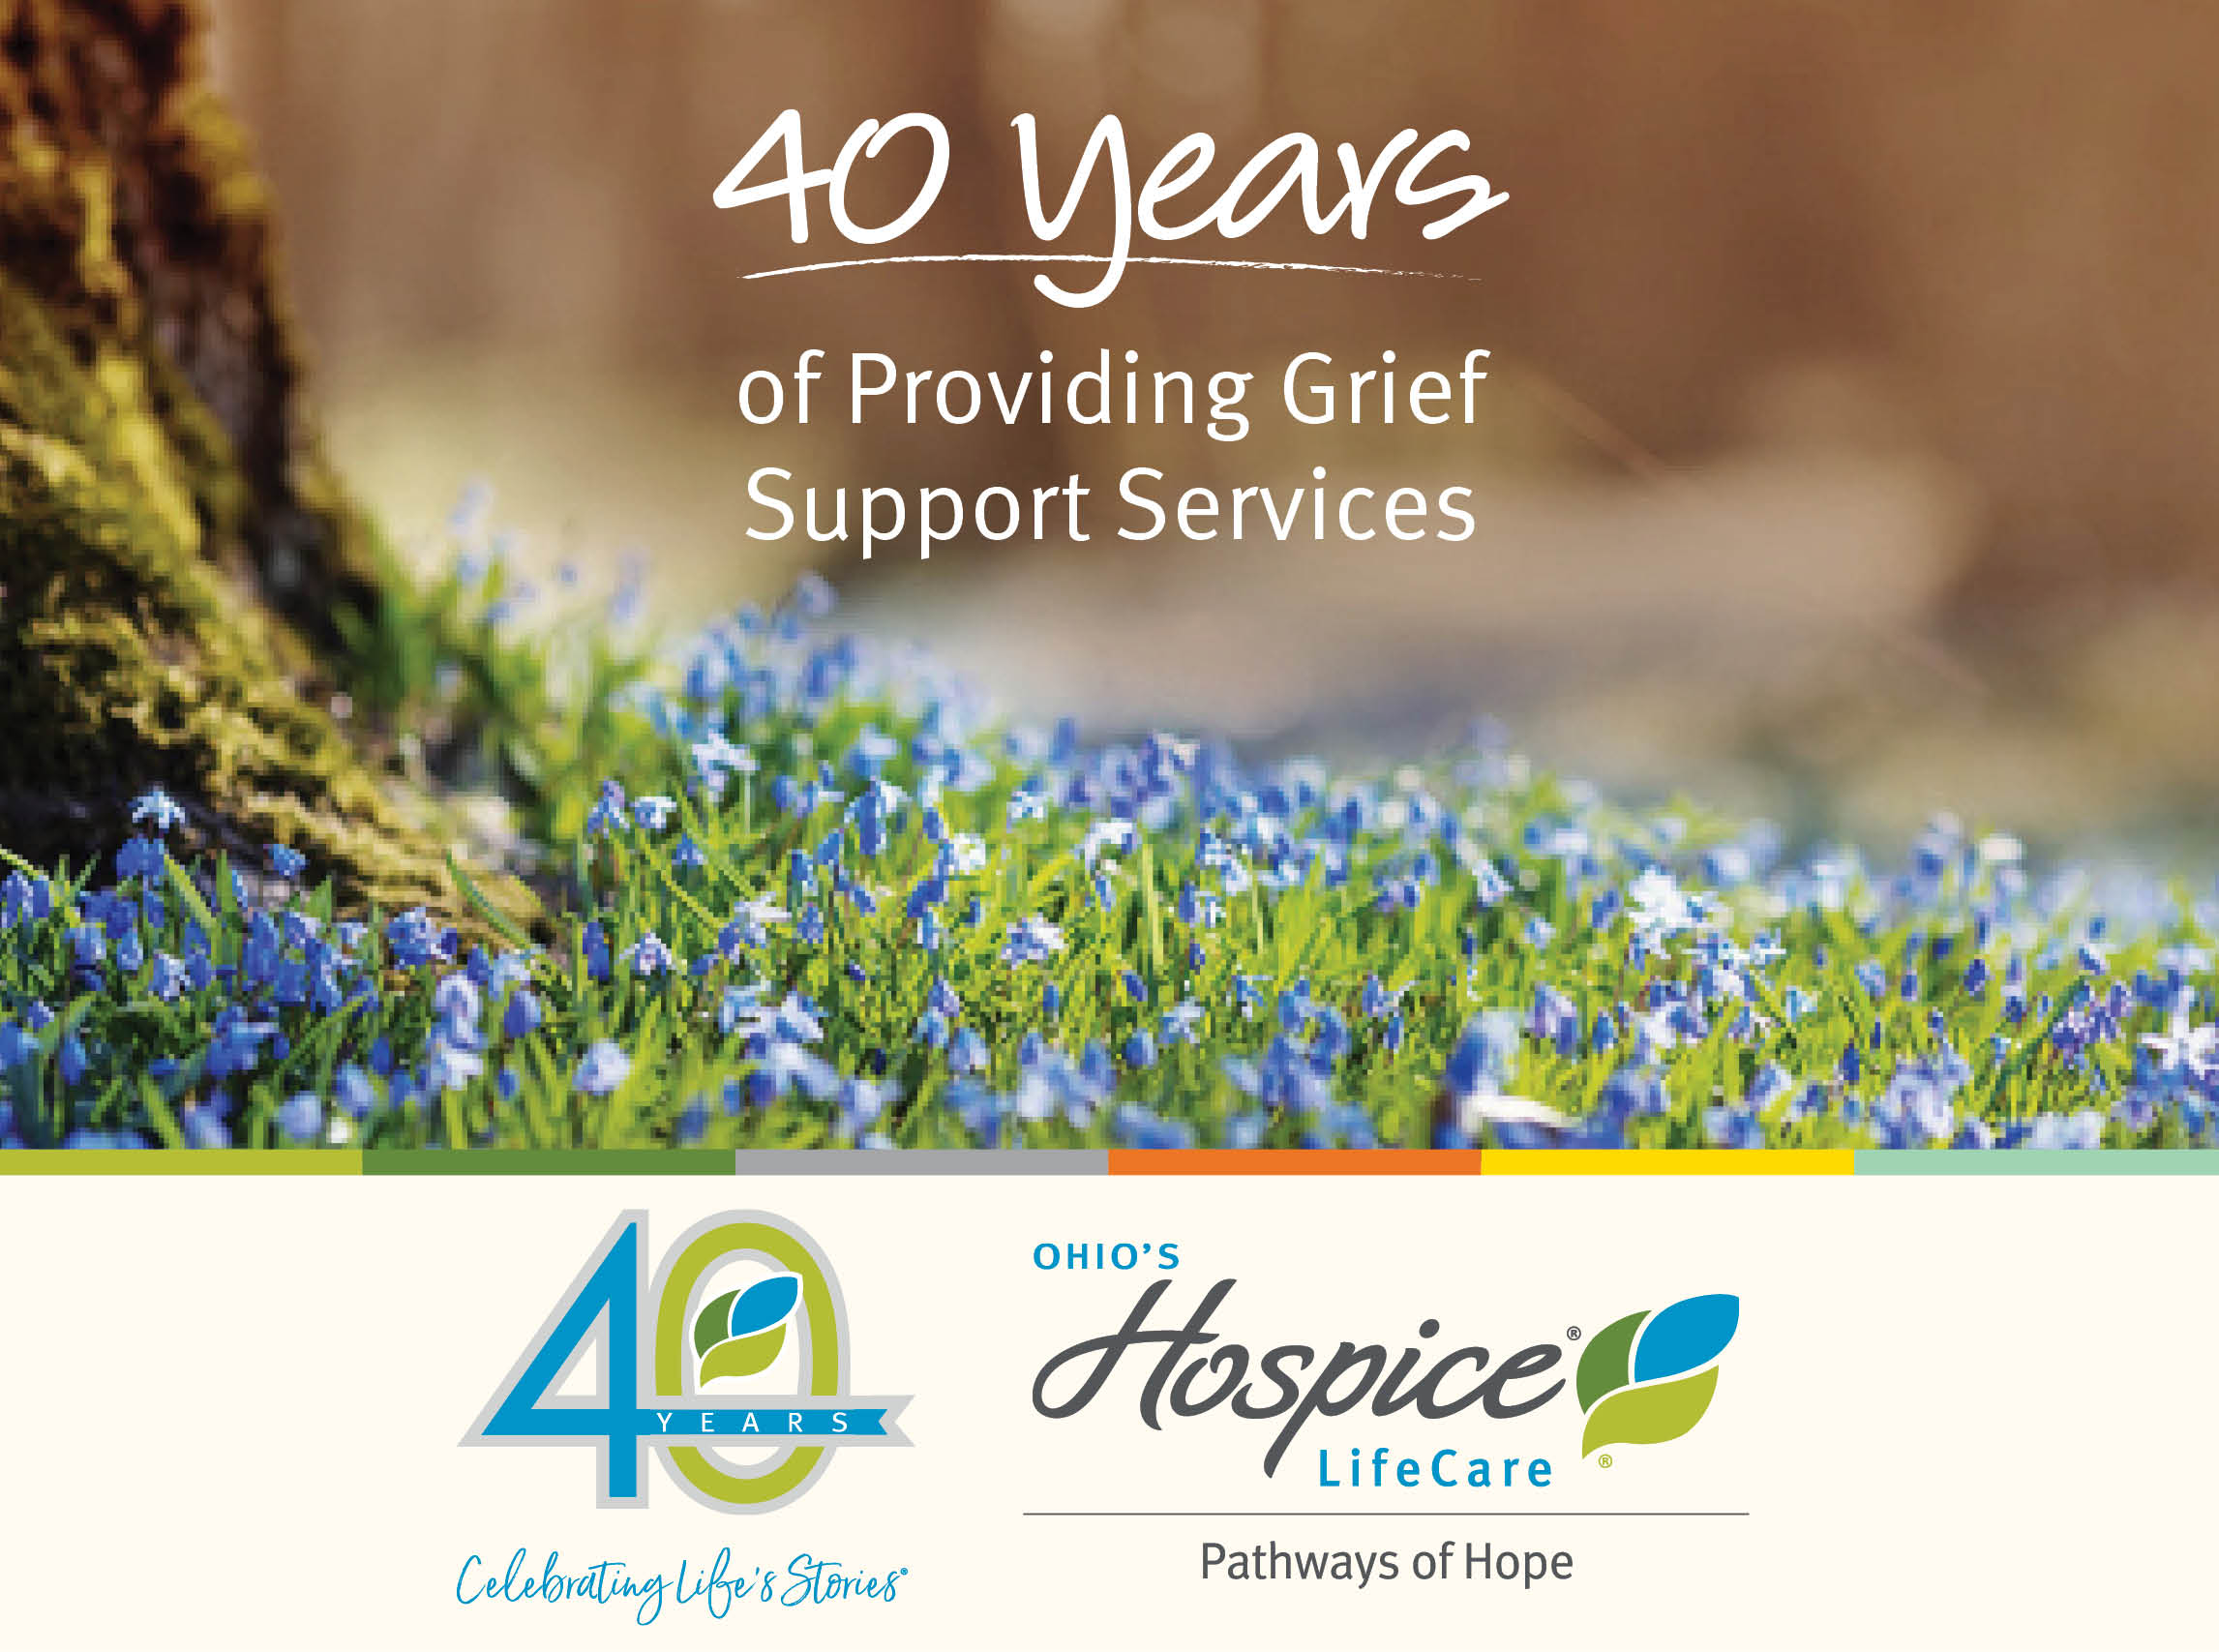 40 Years of Providing Grief Support Services - Ohio's Hospice LifeCare Pathways of Hope